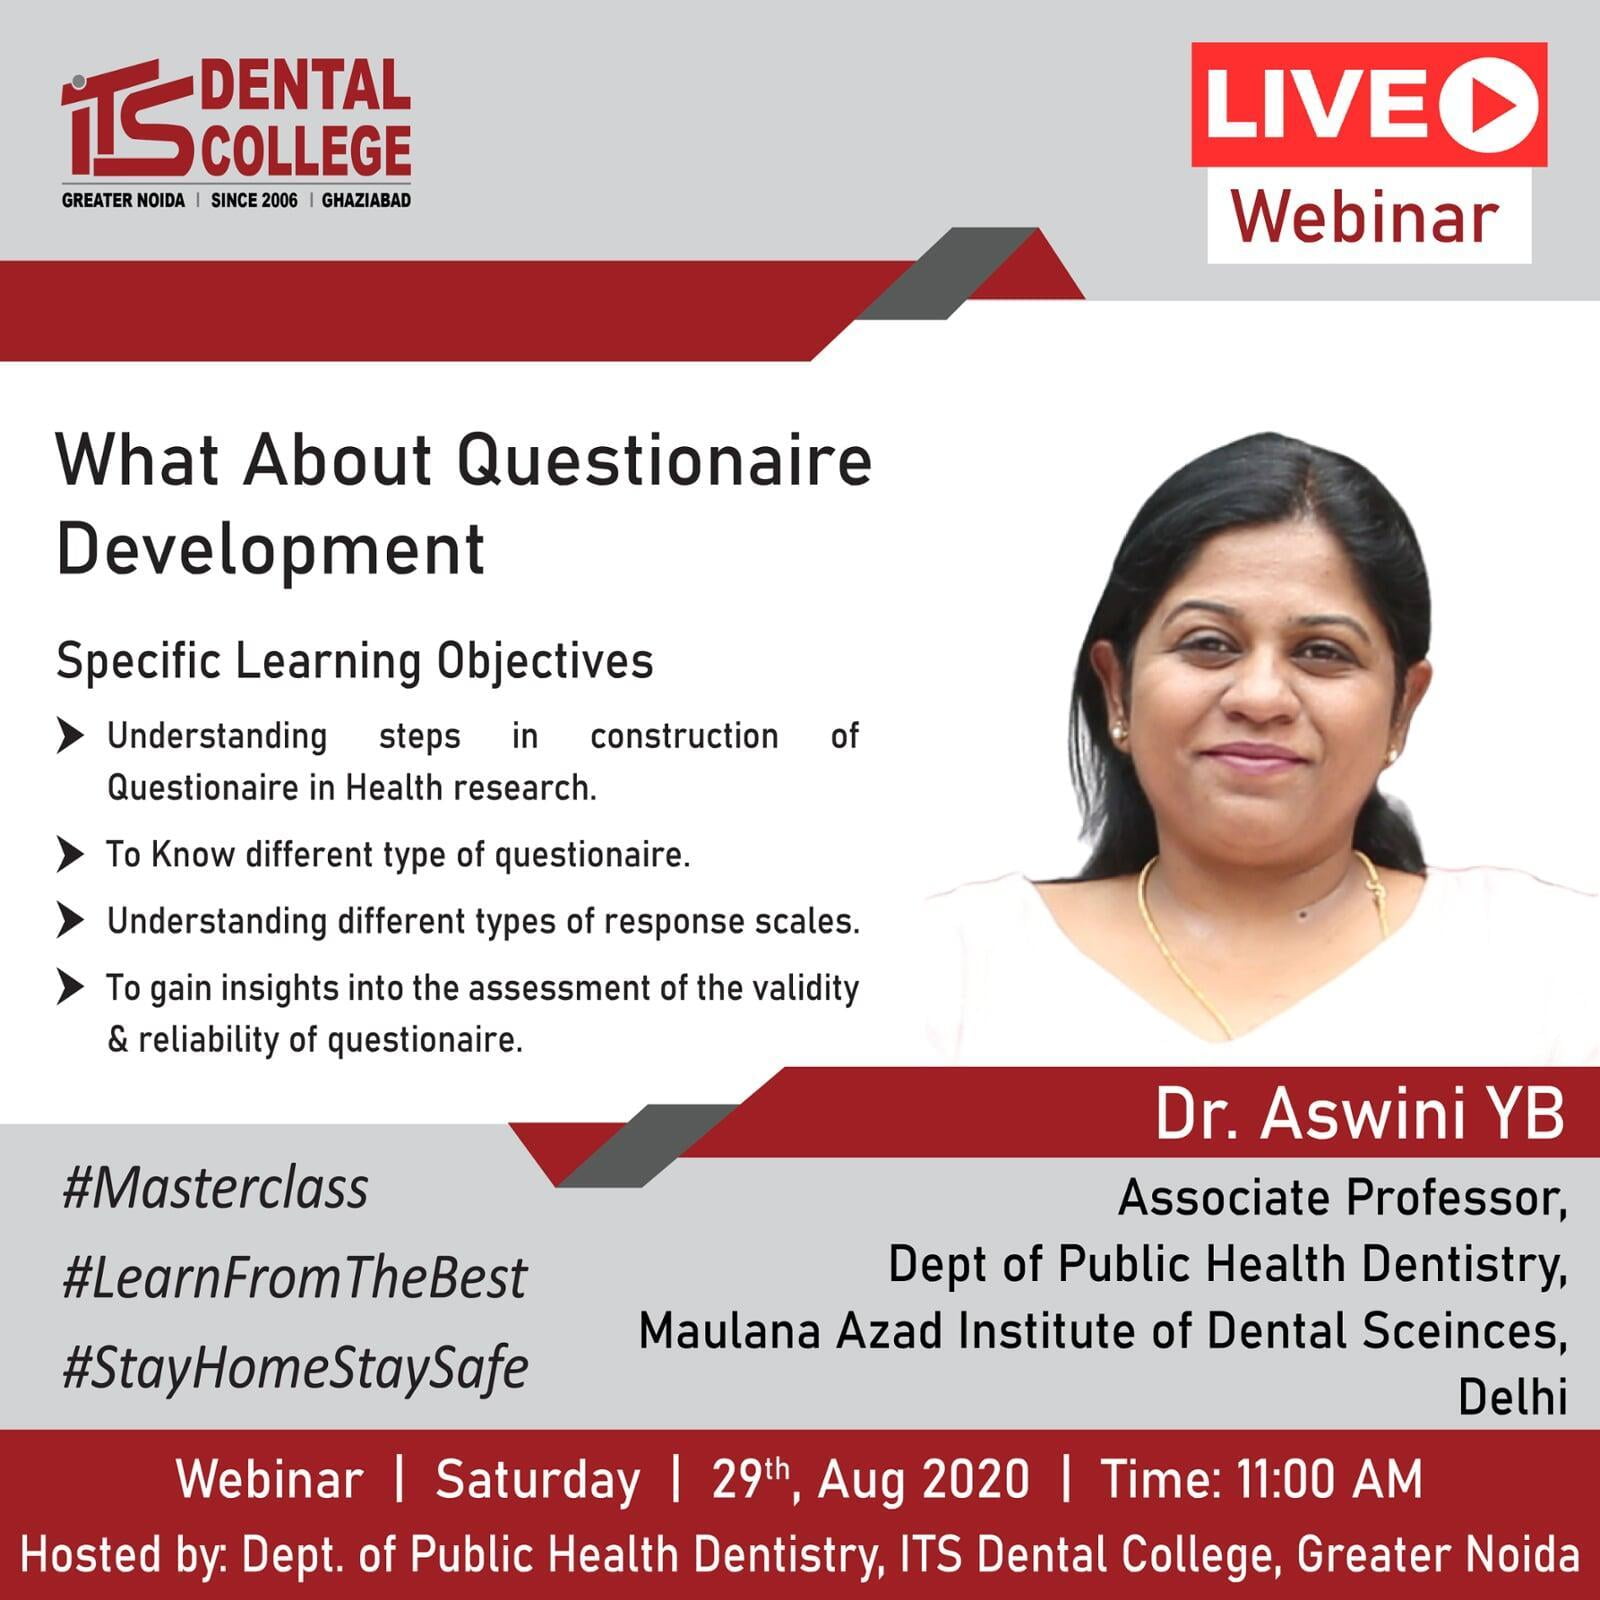 Live Webinar on “What about Questionnaire Development" on 29th August 2020